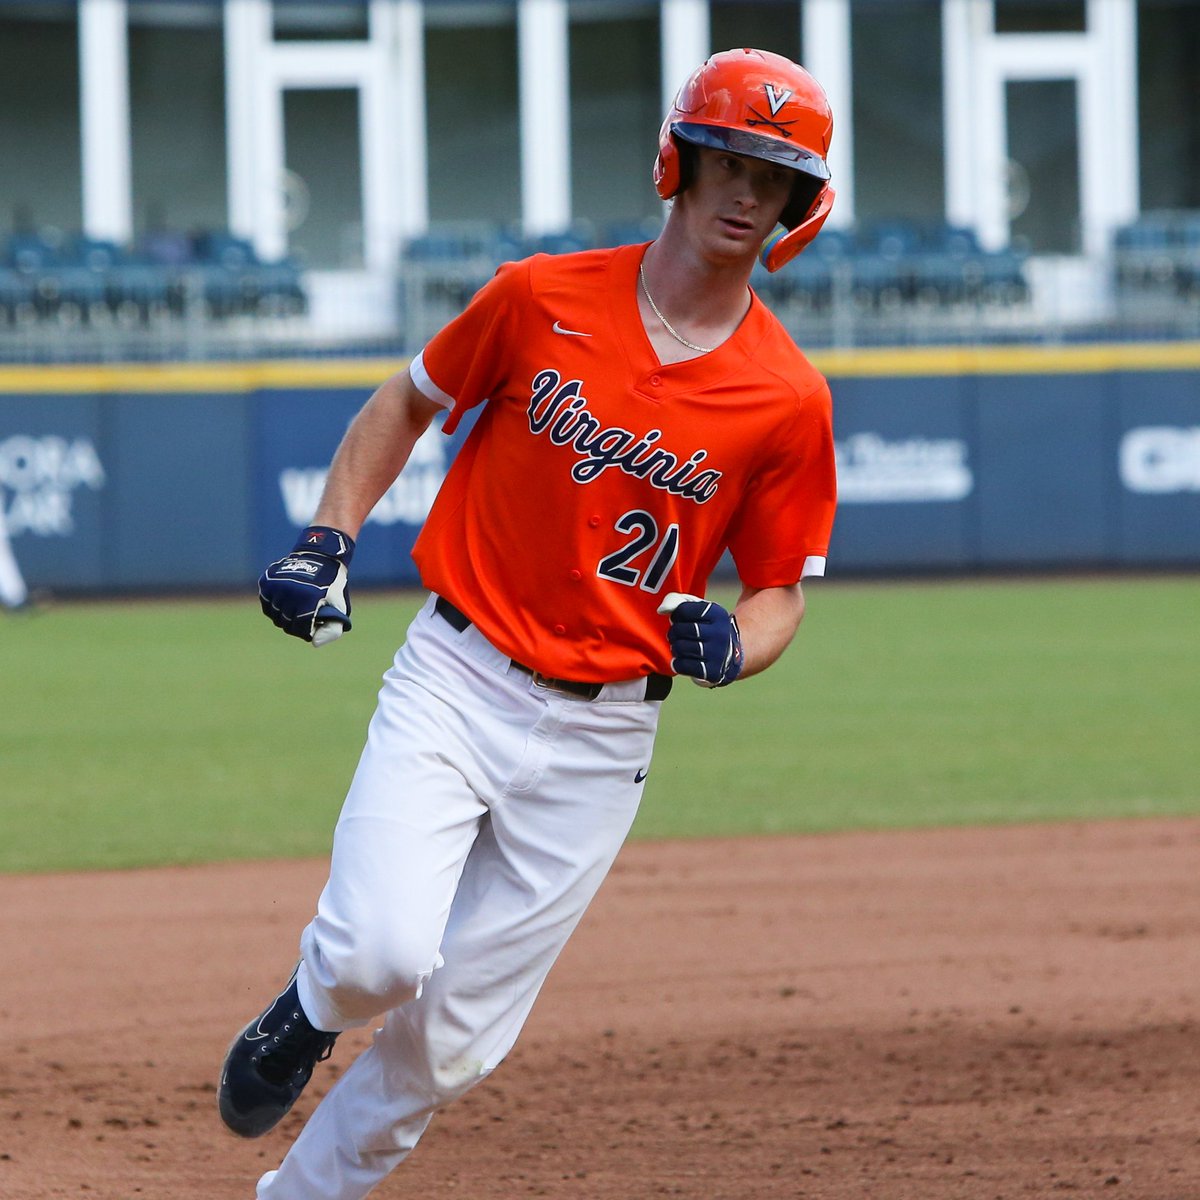 Sophomore Colin Tuft (.292/.410/.375 in 2022) swung the bat well in a small sample last season for @UVABaseball. @colin_tuft played even better in the exhibition against Maryland, going 4-for-4 with two doubles, a home run and six RBIs. 🔗 d1ba.se/3iLAqB6